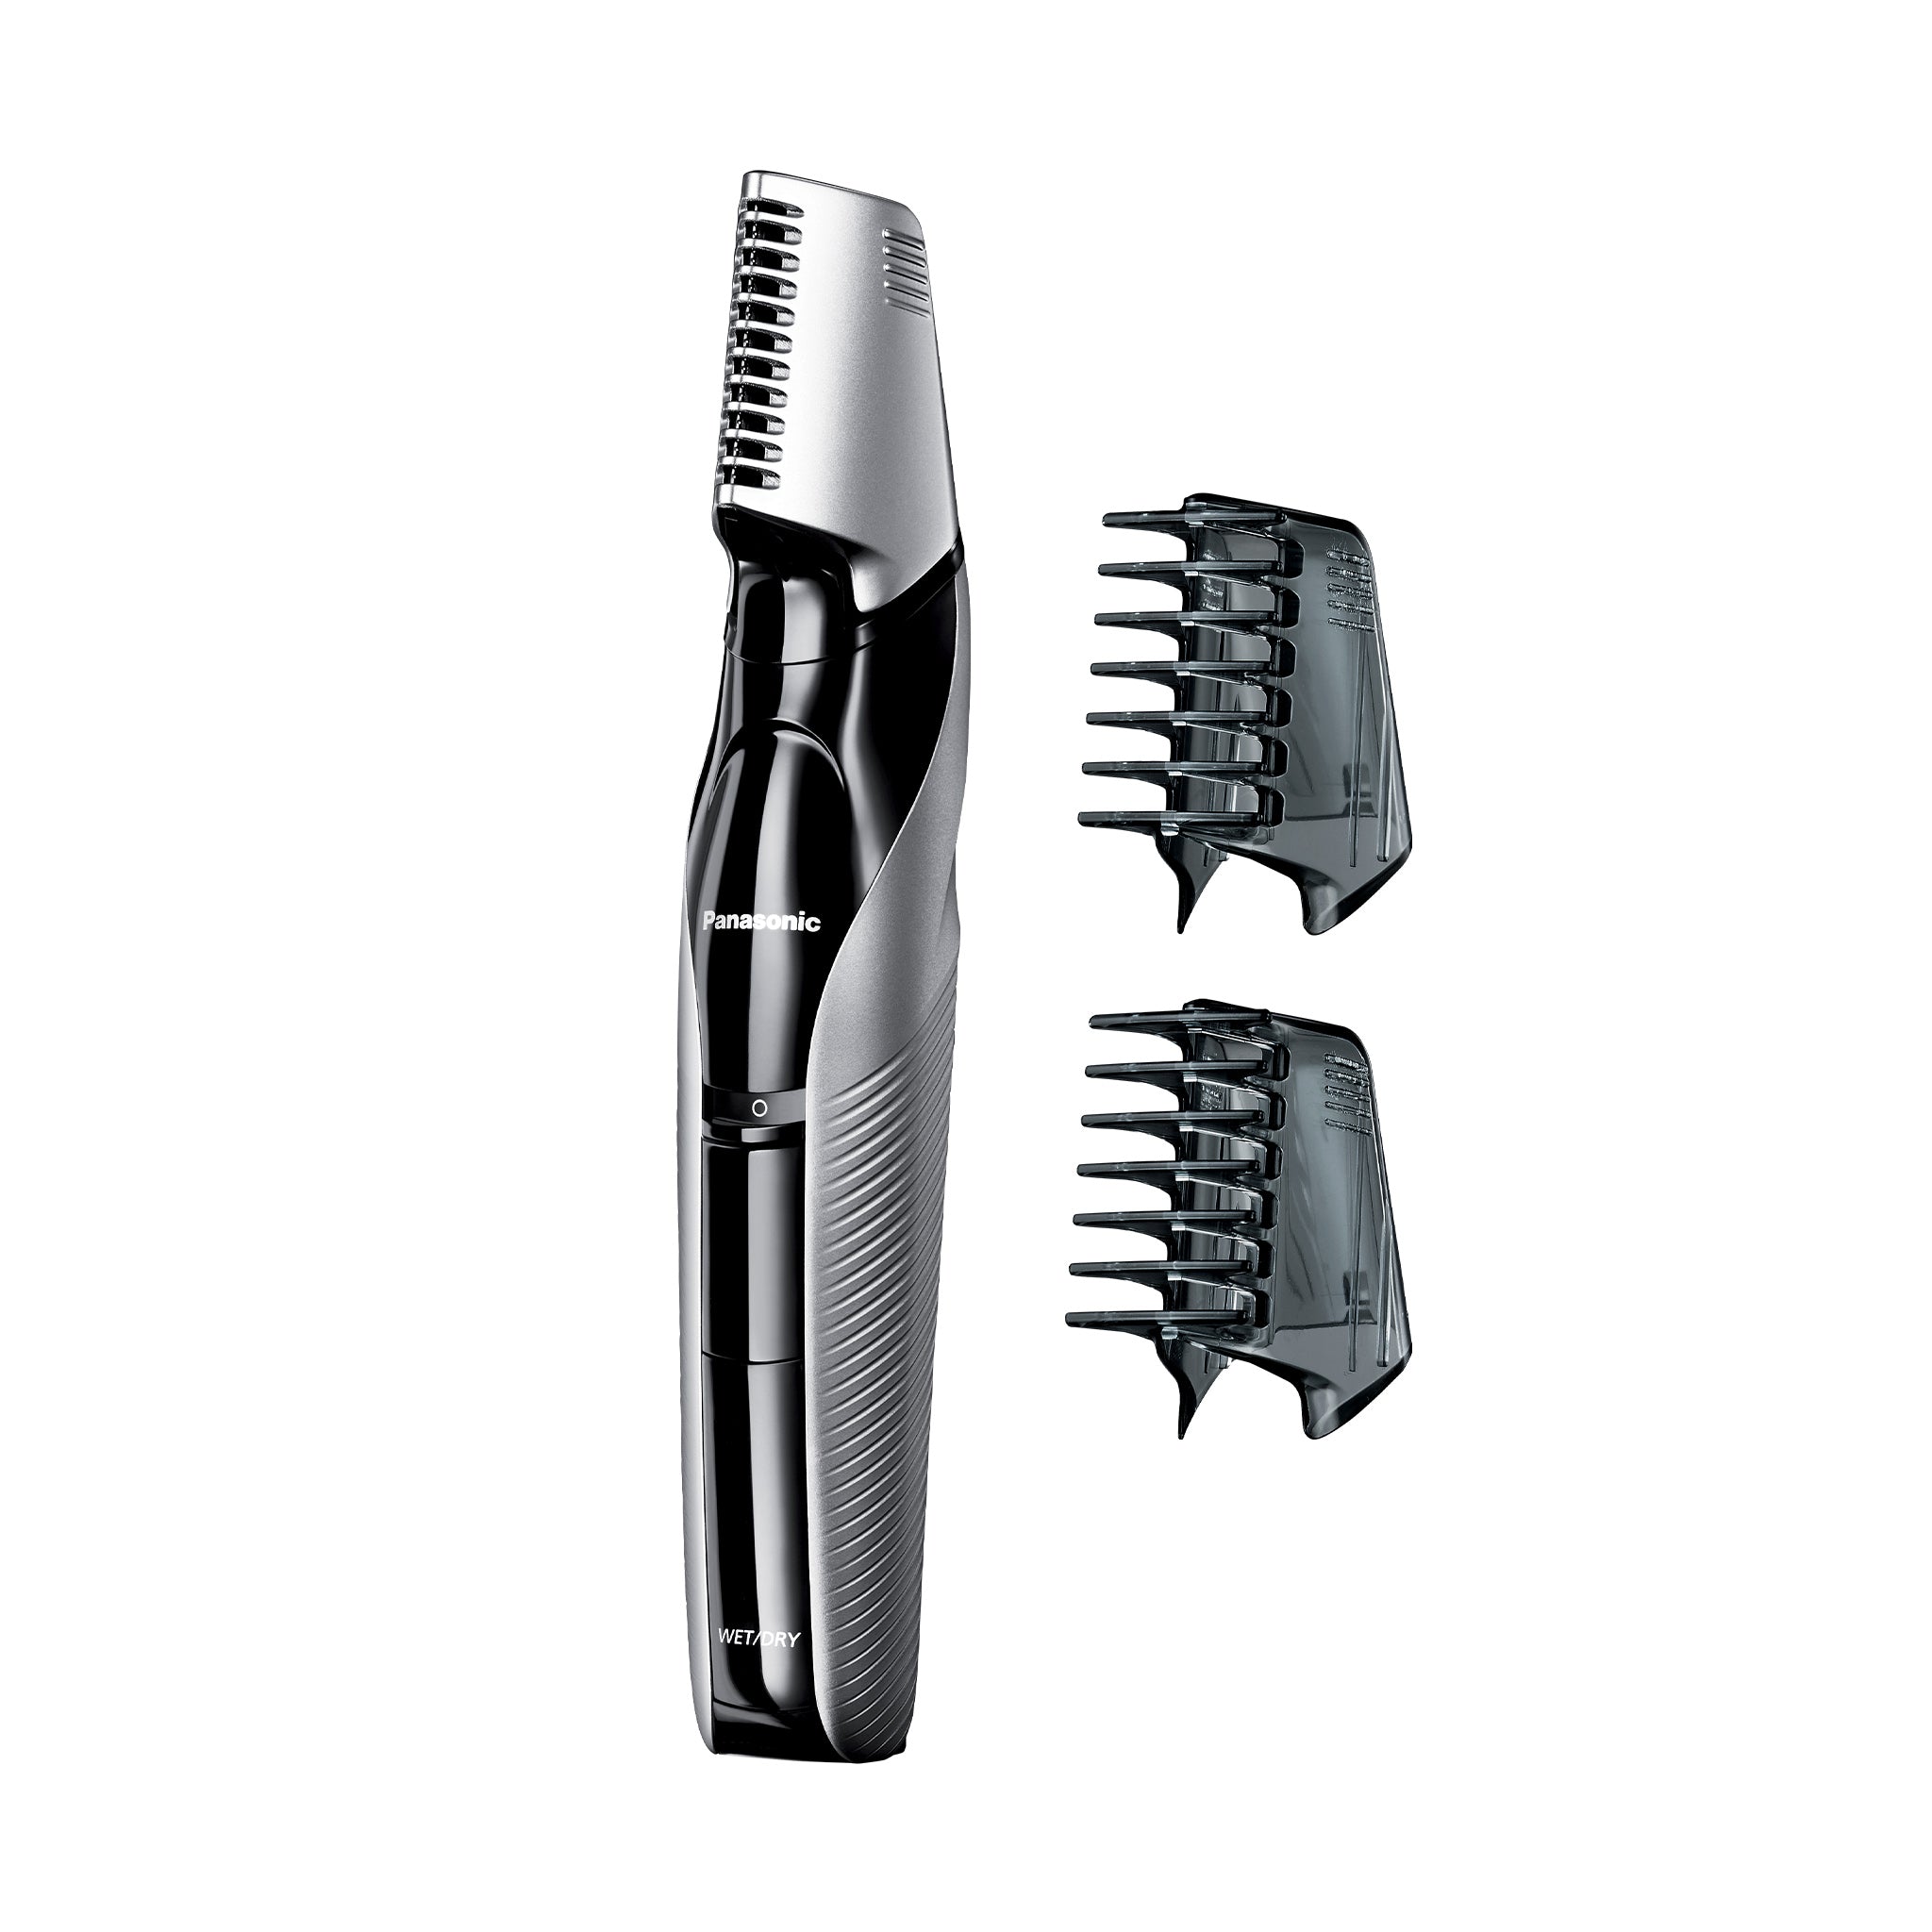 Groomer - Hair 3 Body Comb Panasonic Attachments ER-GK60-S with